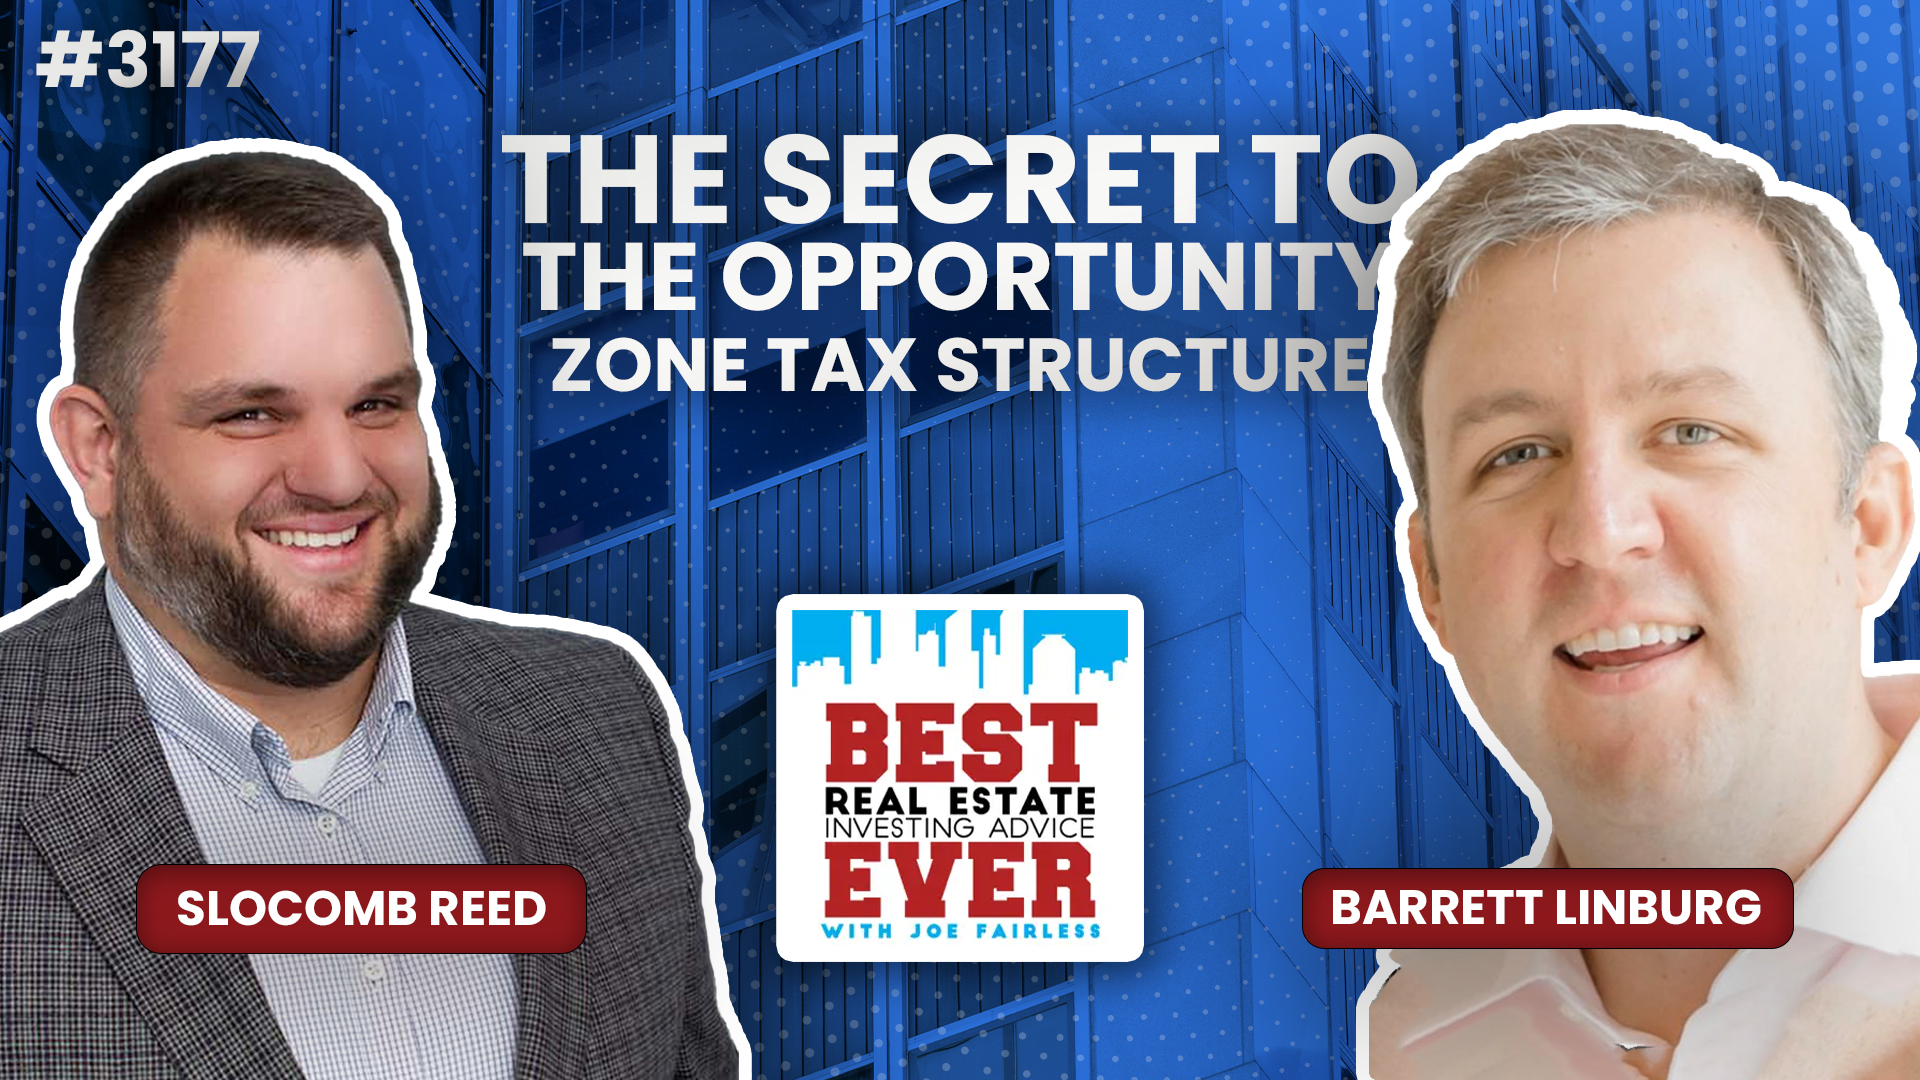 JF3177: The Secret to the Opportunity Zone Tax Structure ft. Barrett Linburg